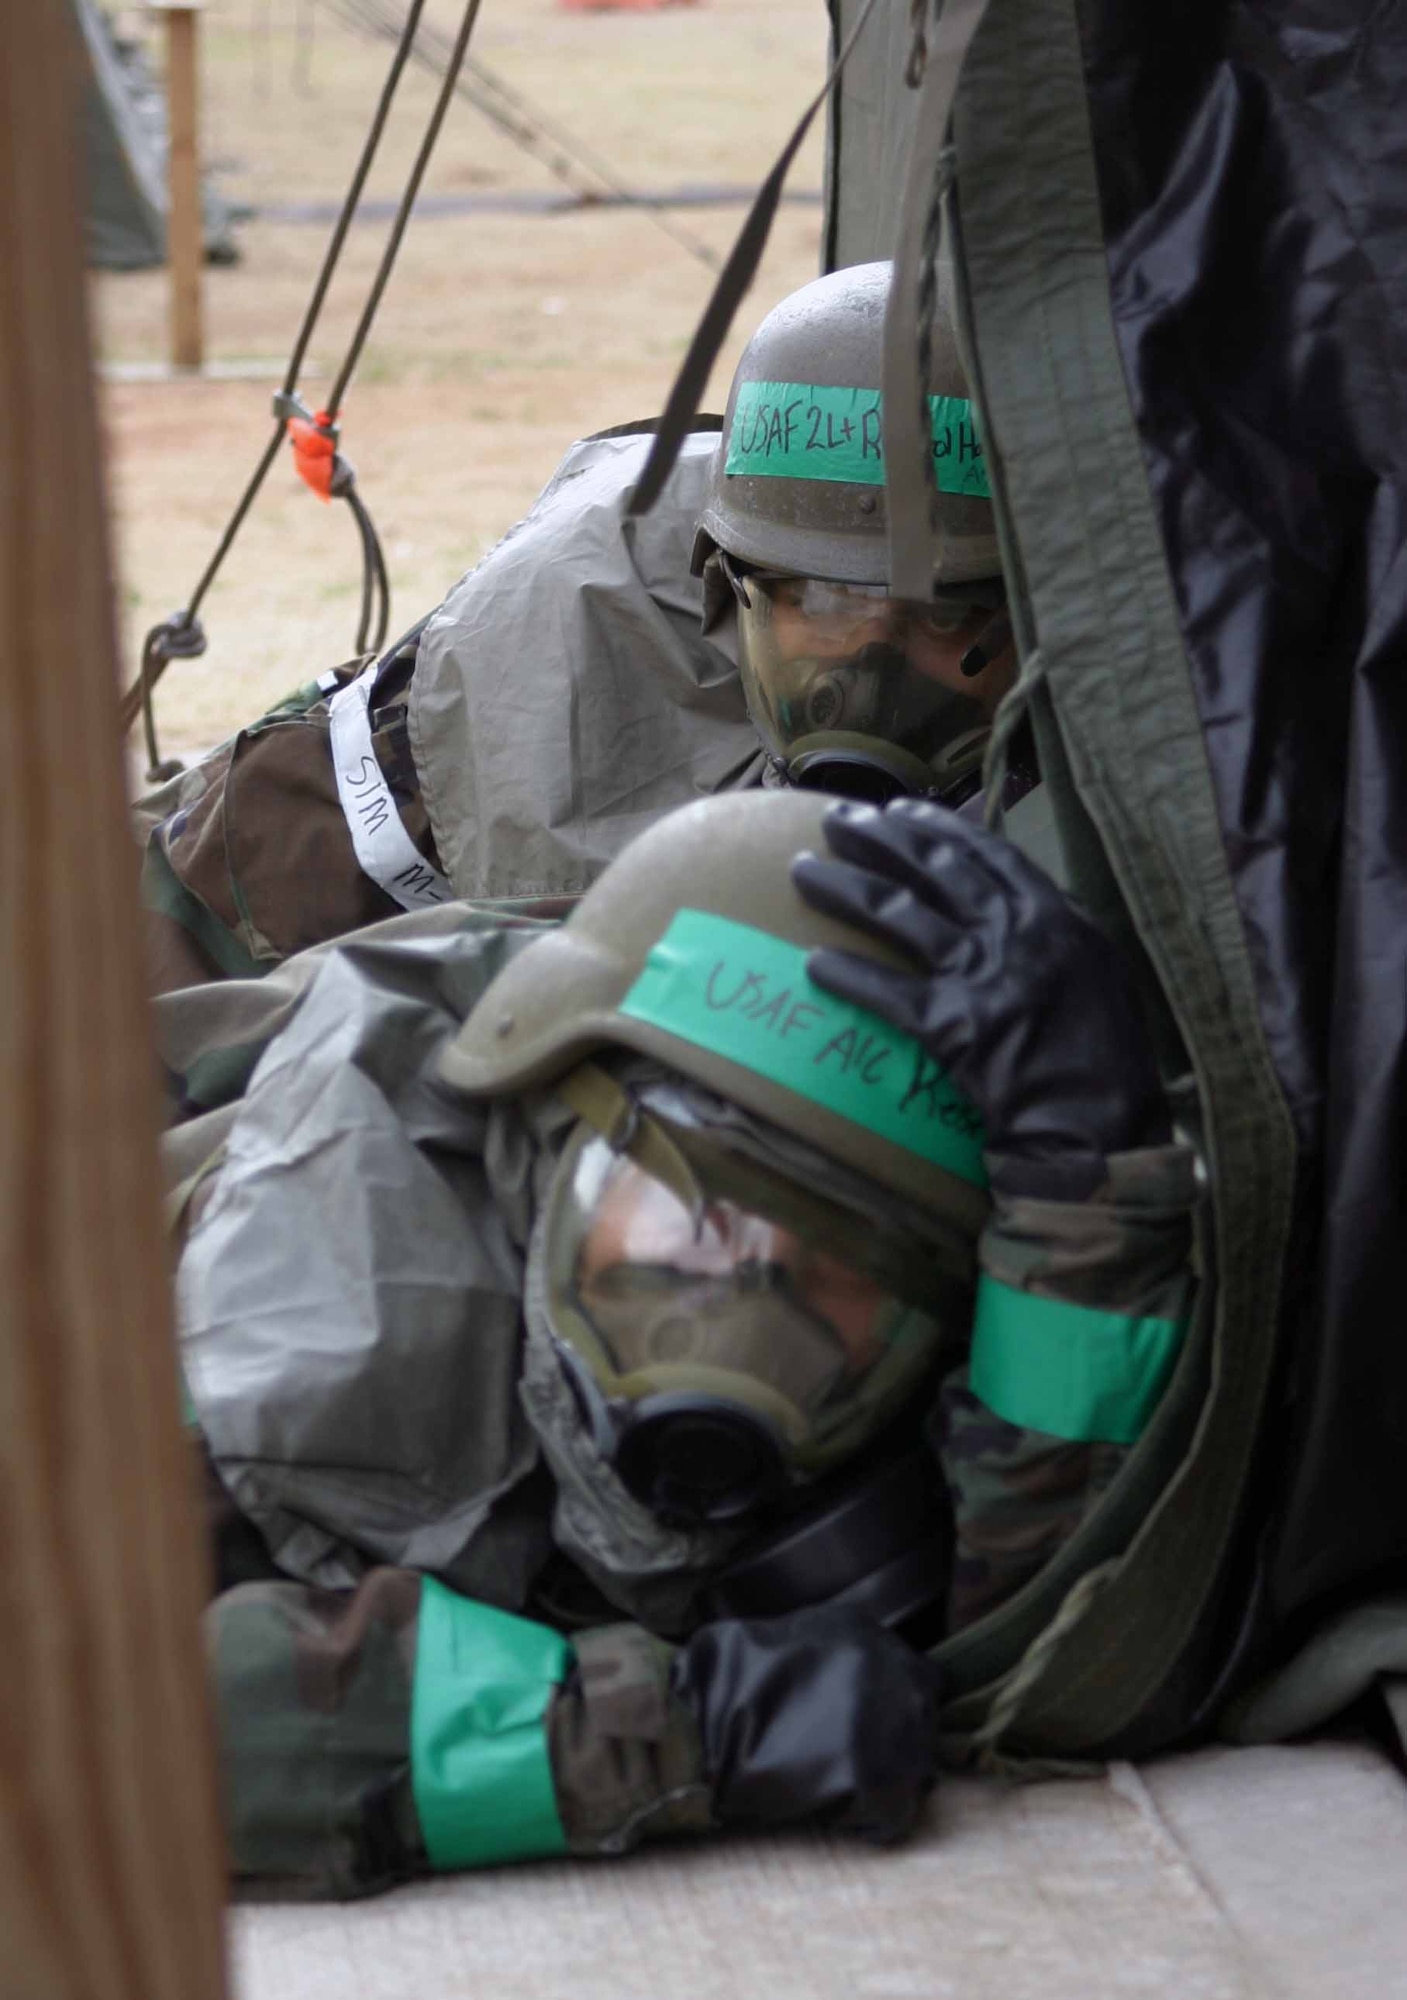 During last year's exercise, Airmen practiced taking cover in full chemical warfare gear. (Air Force photo by Staff Sgt. Stacy Fowler)